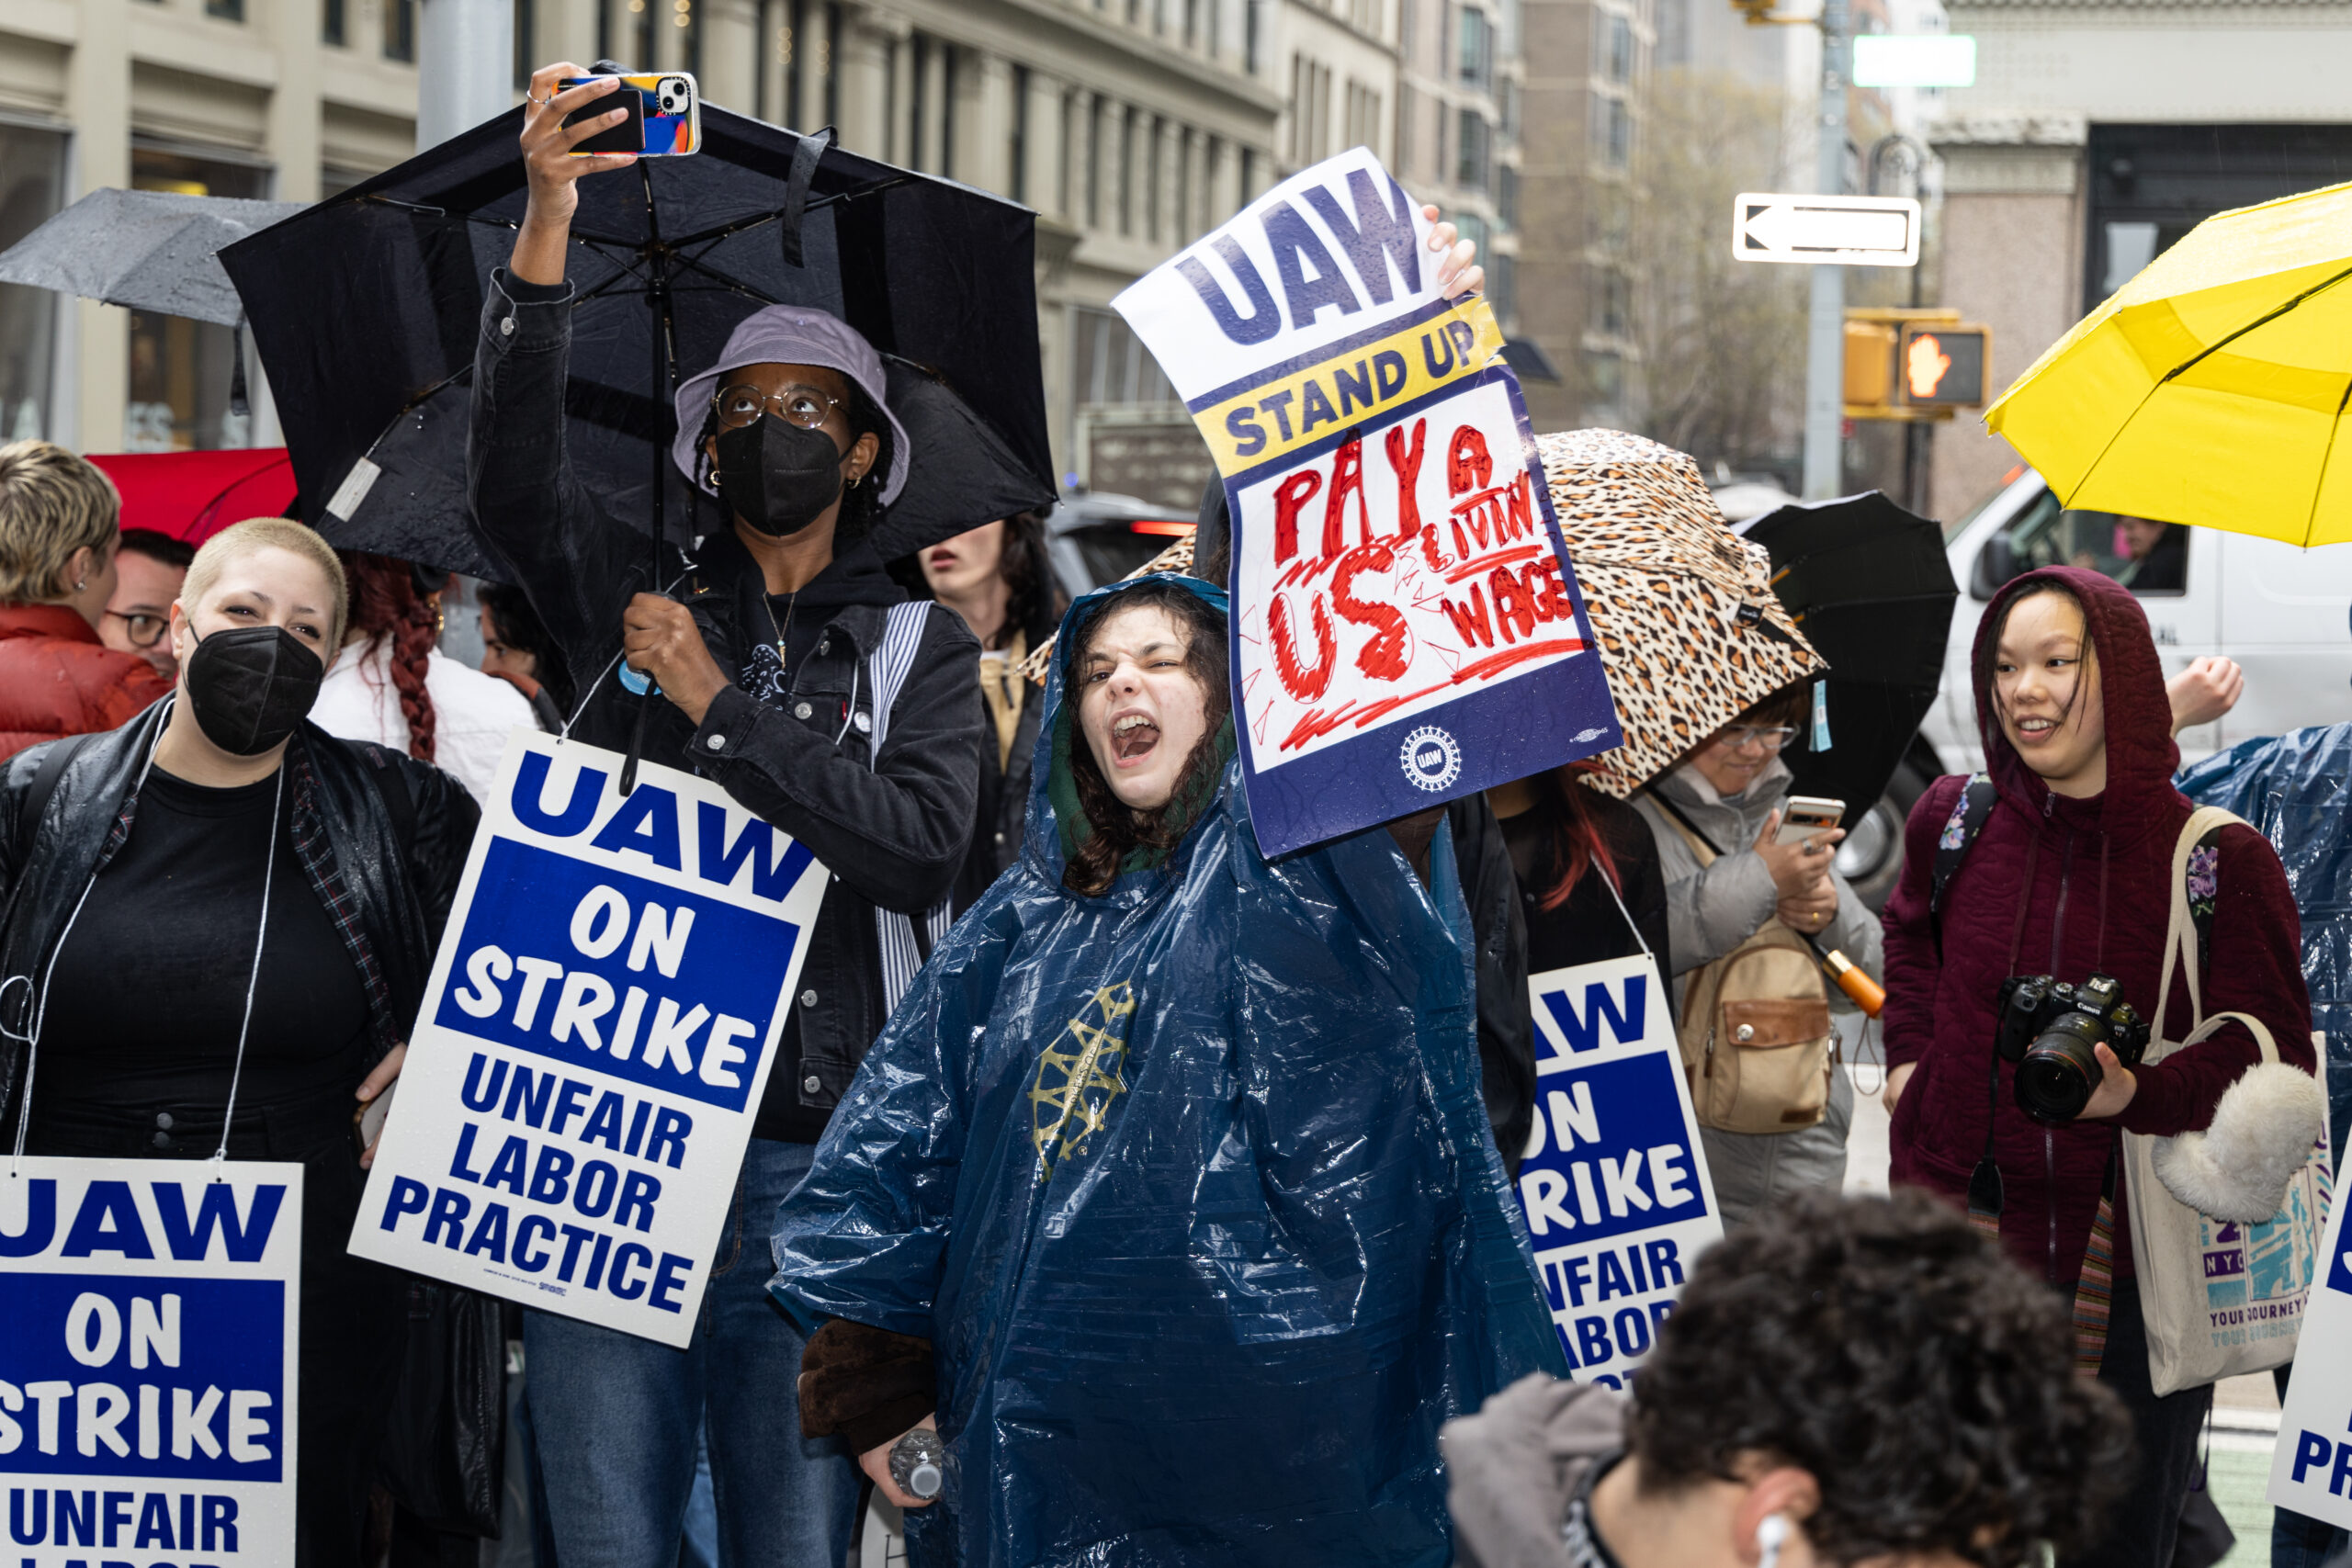 Image of picketers holding signs. The signs read “UAW on strike. Unfair Labor Practice."